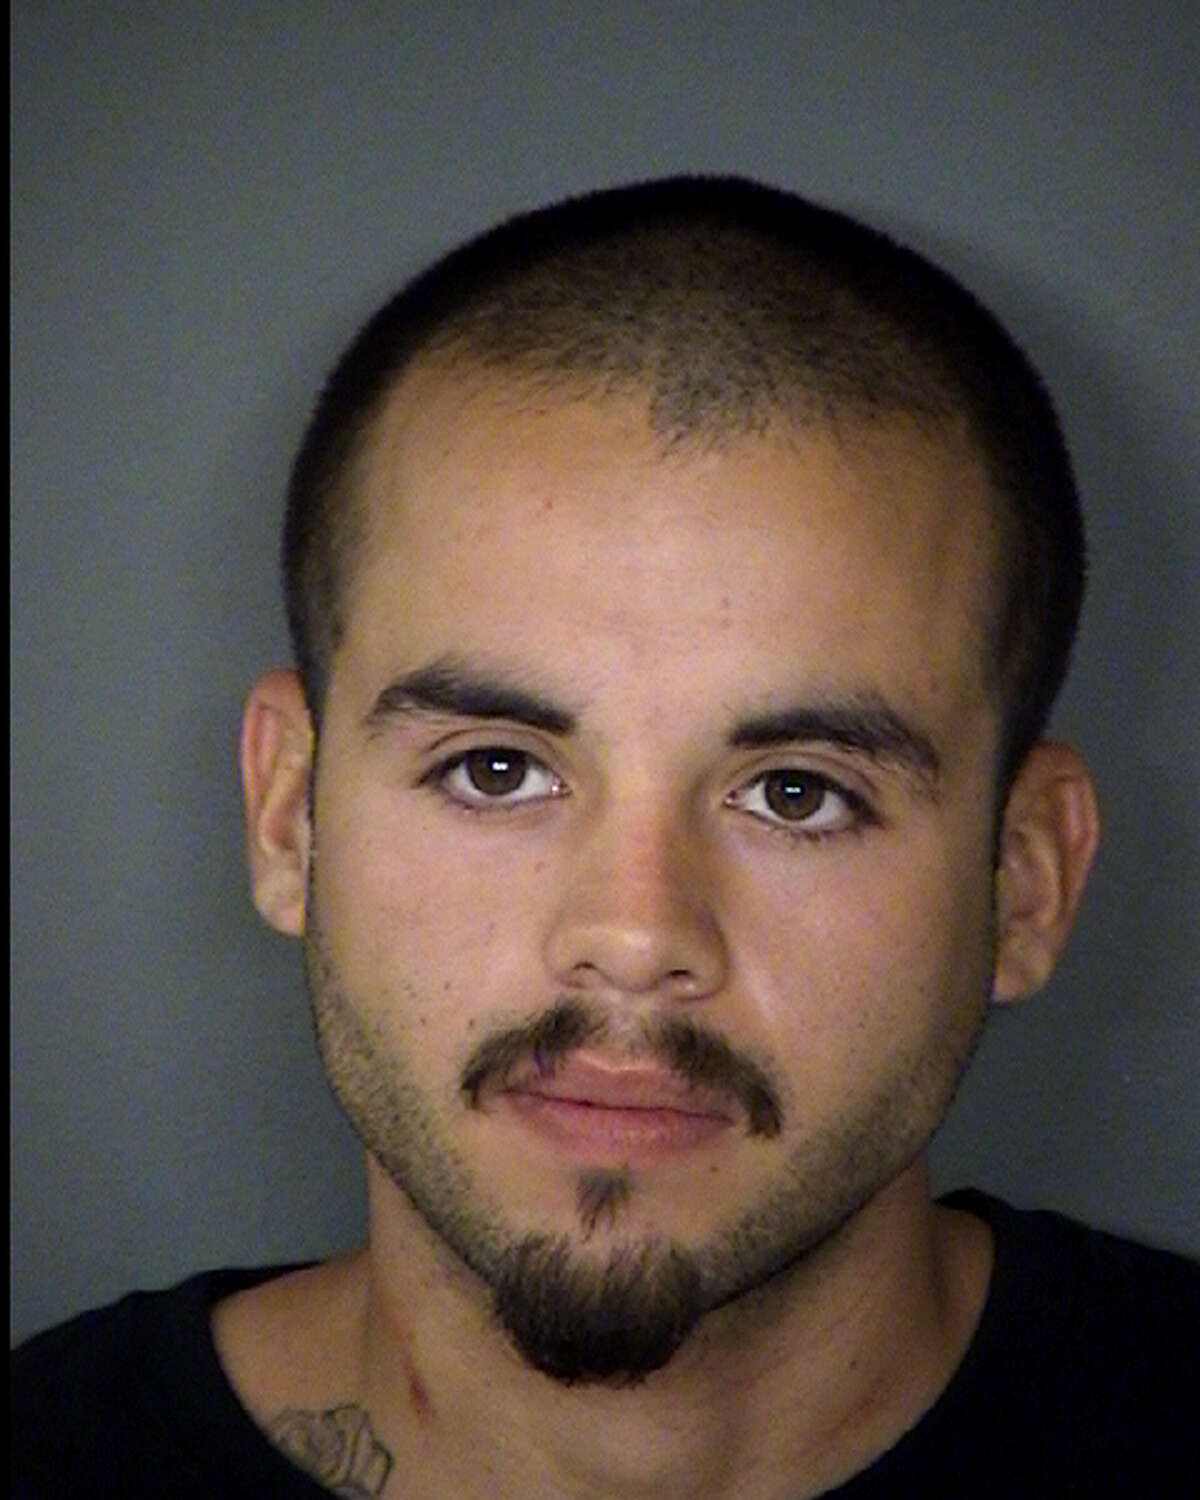 According to police, Zachary Gonzales shot and killed Donovan Rae Arzola, 23, after a brief and unprovoked exchange.